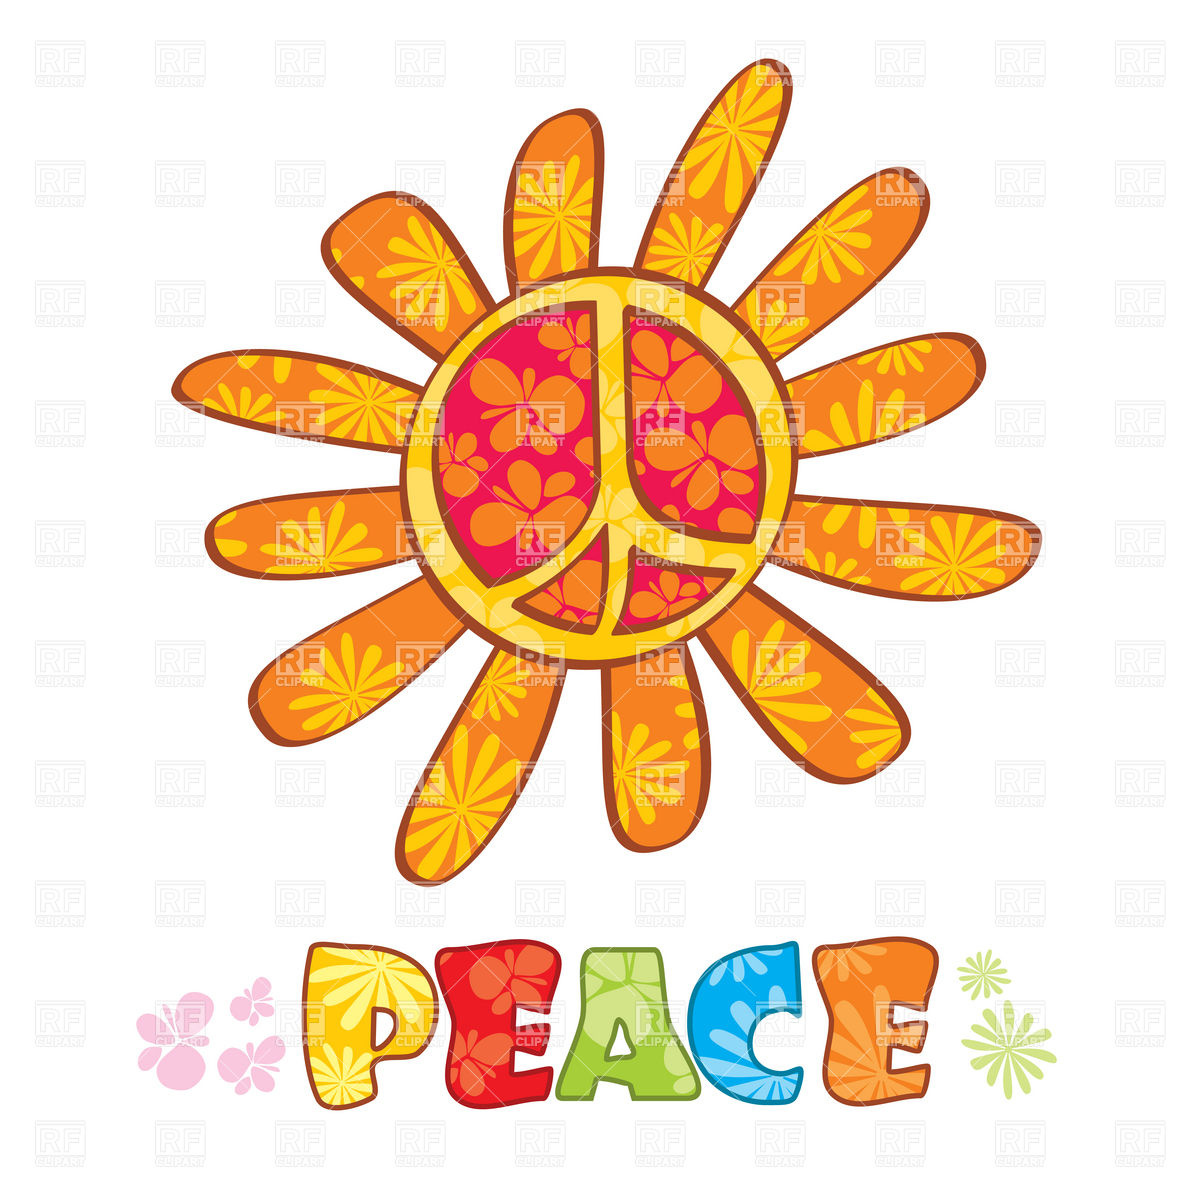 Hippie Peace Symbol With Petals Download Royalty Free Vector Clipart